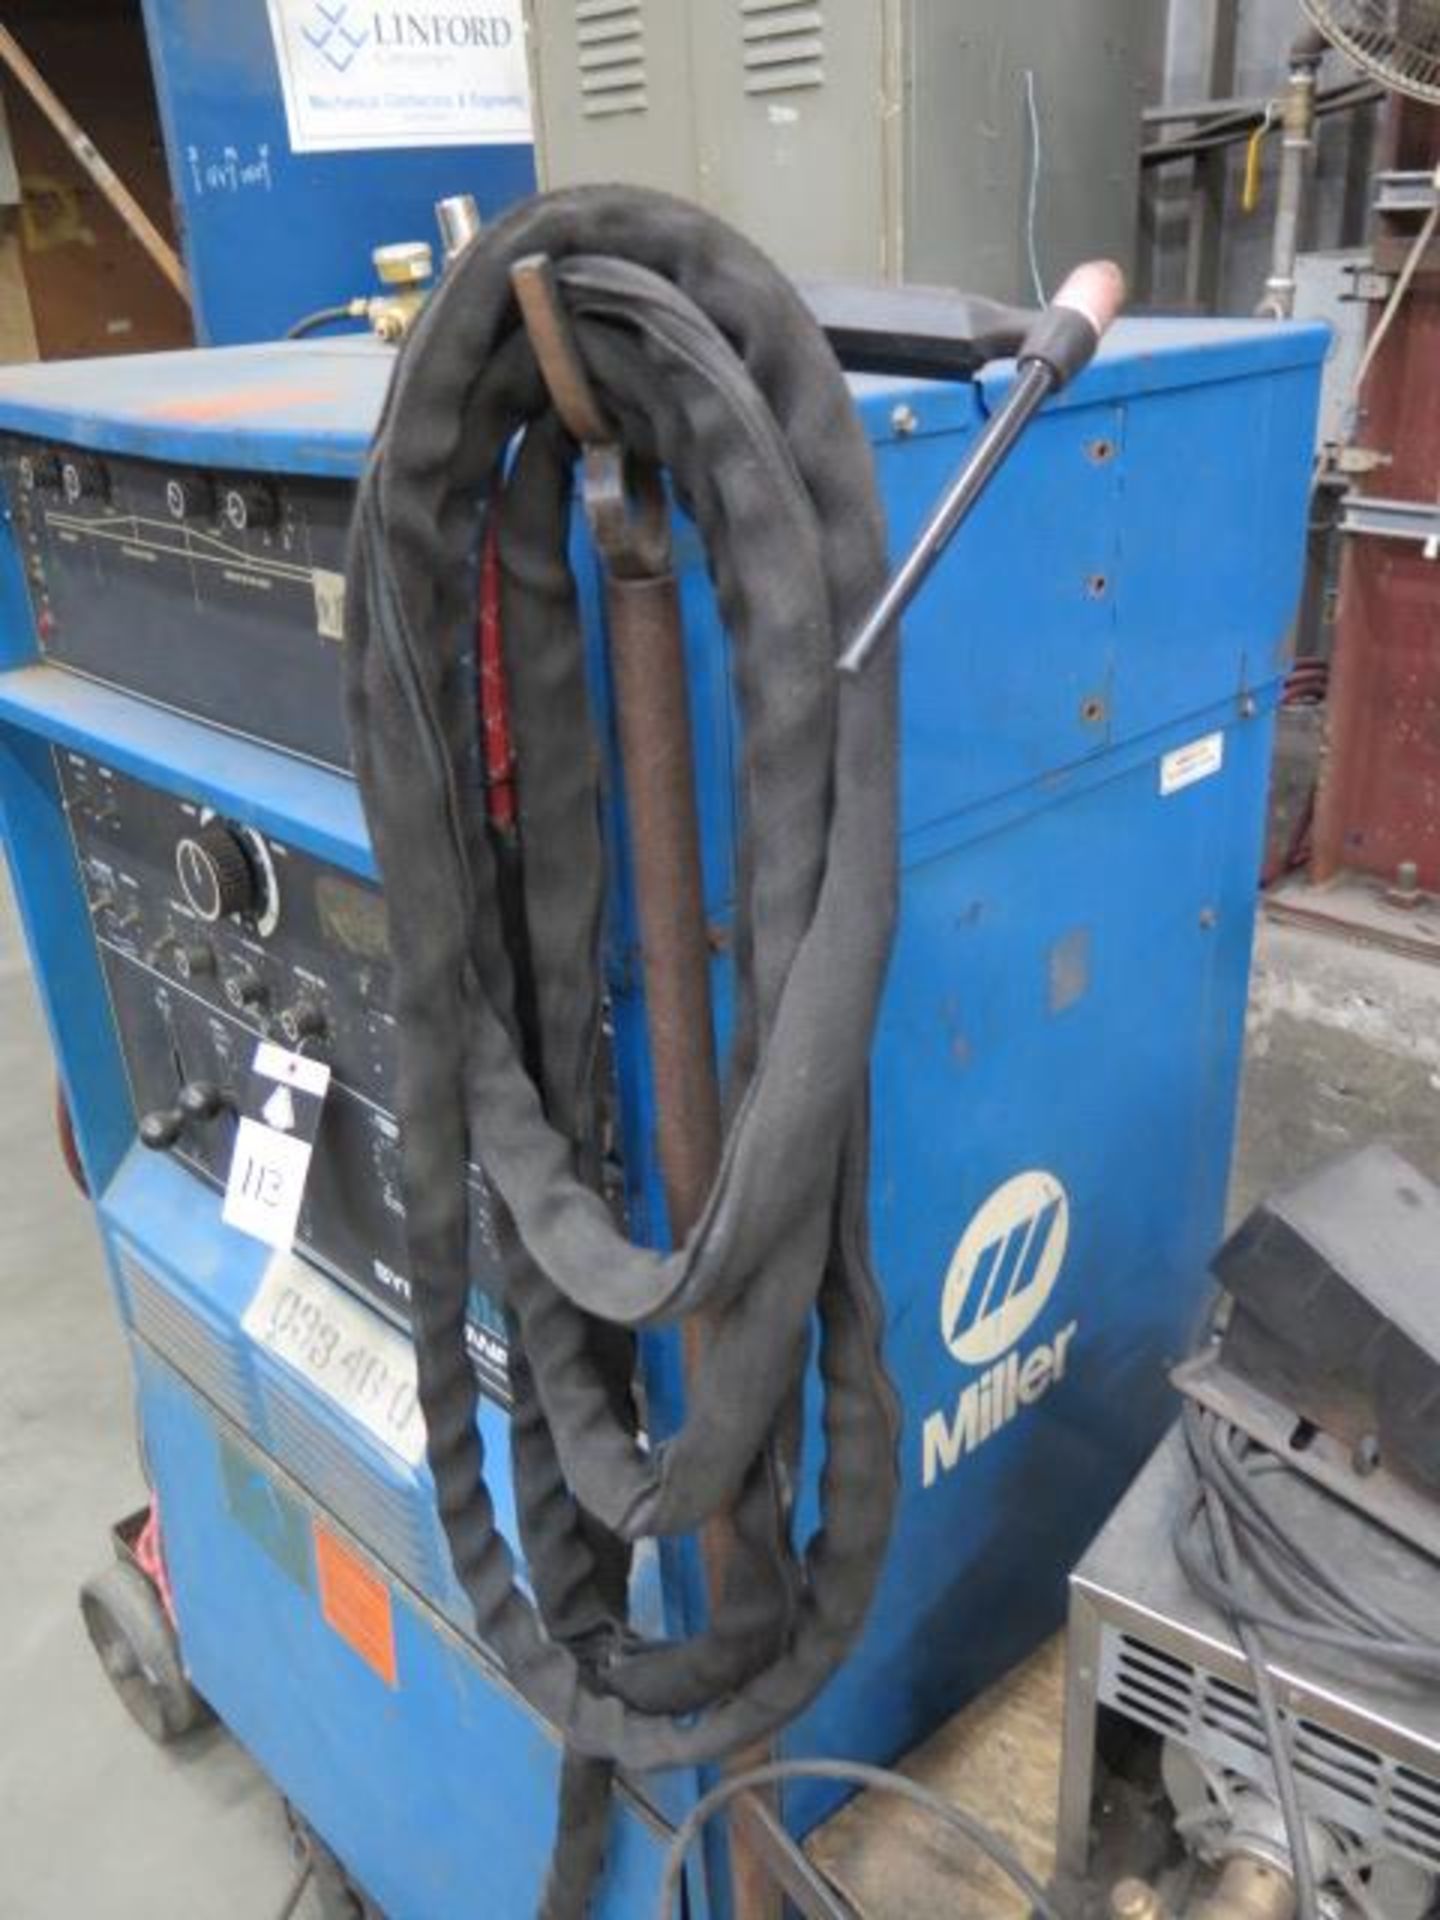 Miller Syncrowave 300 AC/DC Arc Welding Power Source w/ Weld-Tec Cooler, Cart (SOLD AS-IS - NO - Image 6 of 10